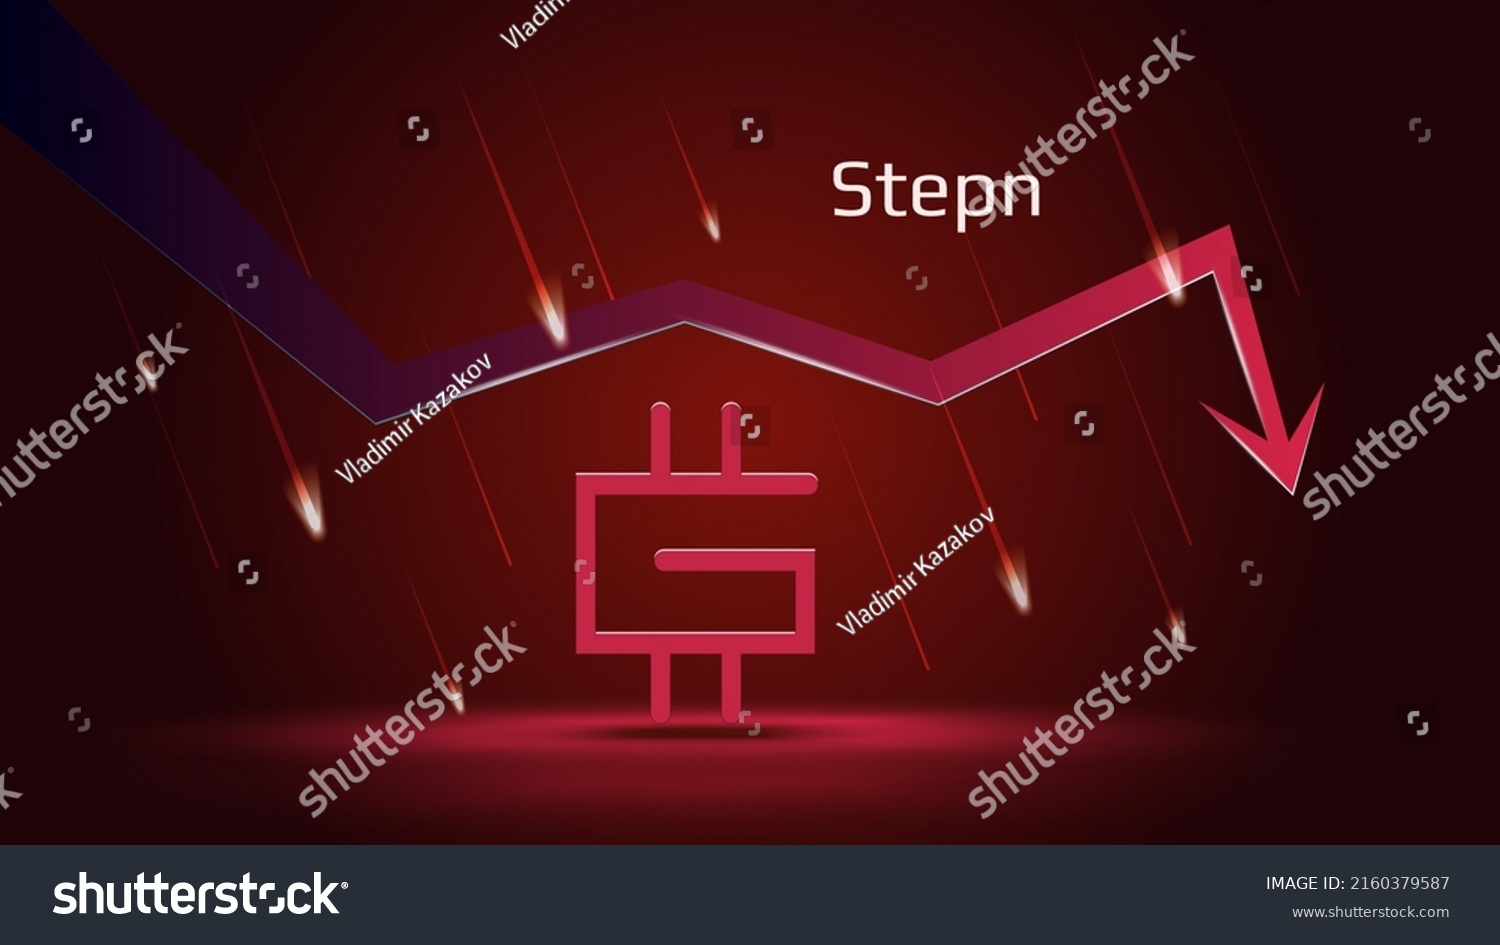 SVG of Stepn GMT in downtrend and price falls down on dark red background. Cryptocurrency coin symbol and red down arrow with falling meteors. Cryptocurrency trading crisis and crash. Vector illustration. svg